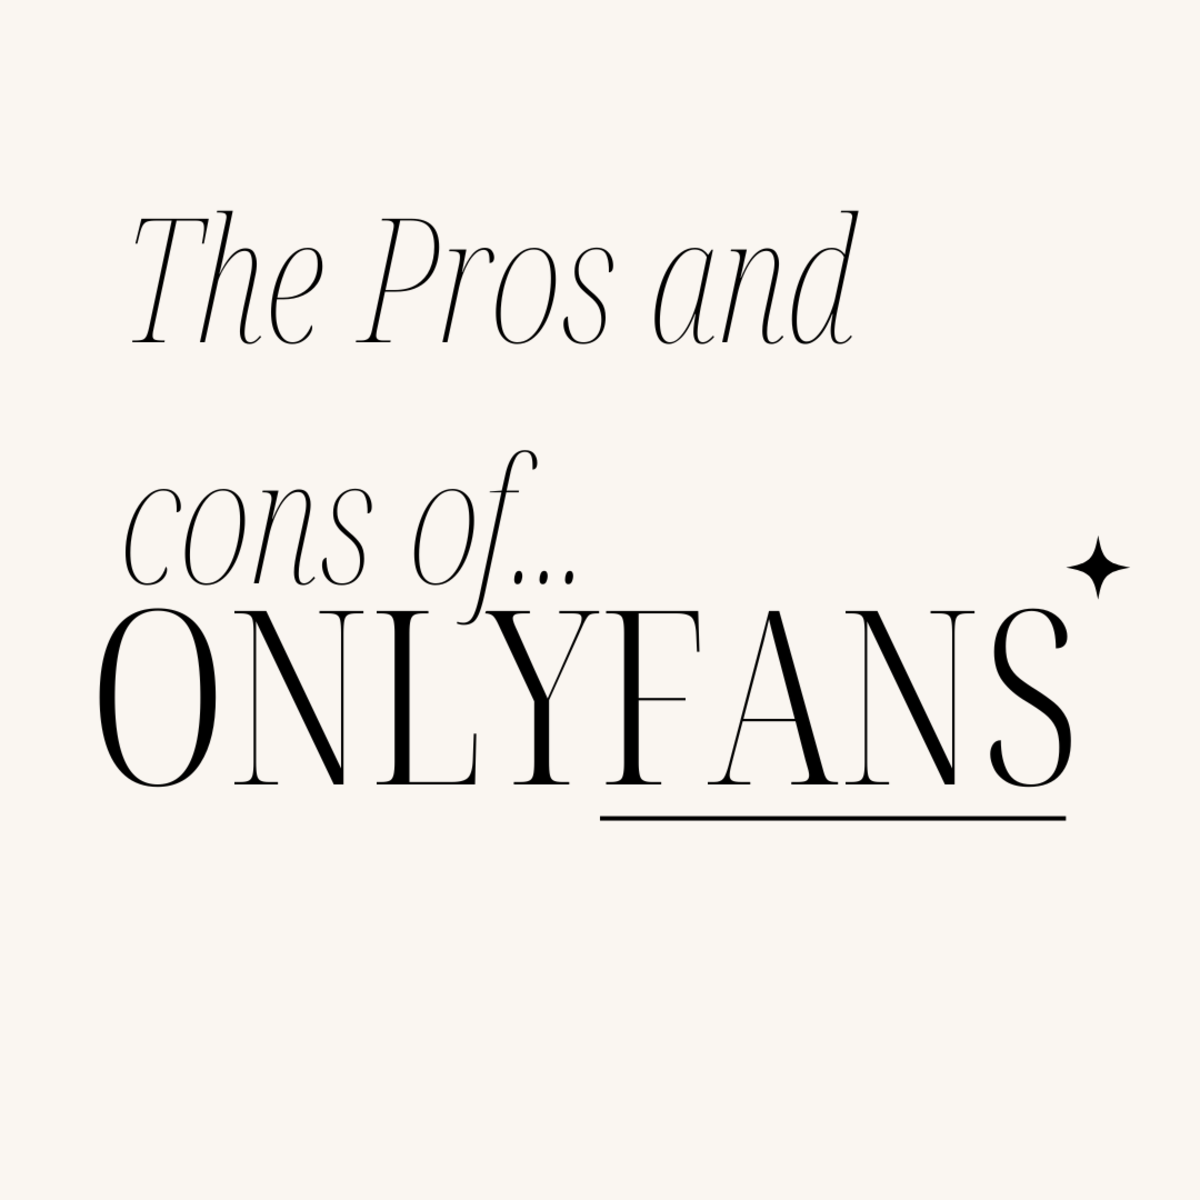 What are the Pros and Cons of Using Onlyfans?